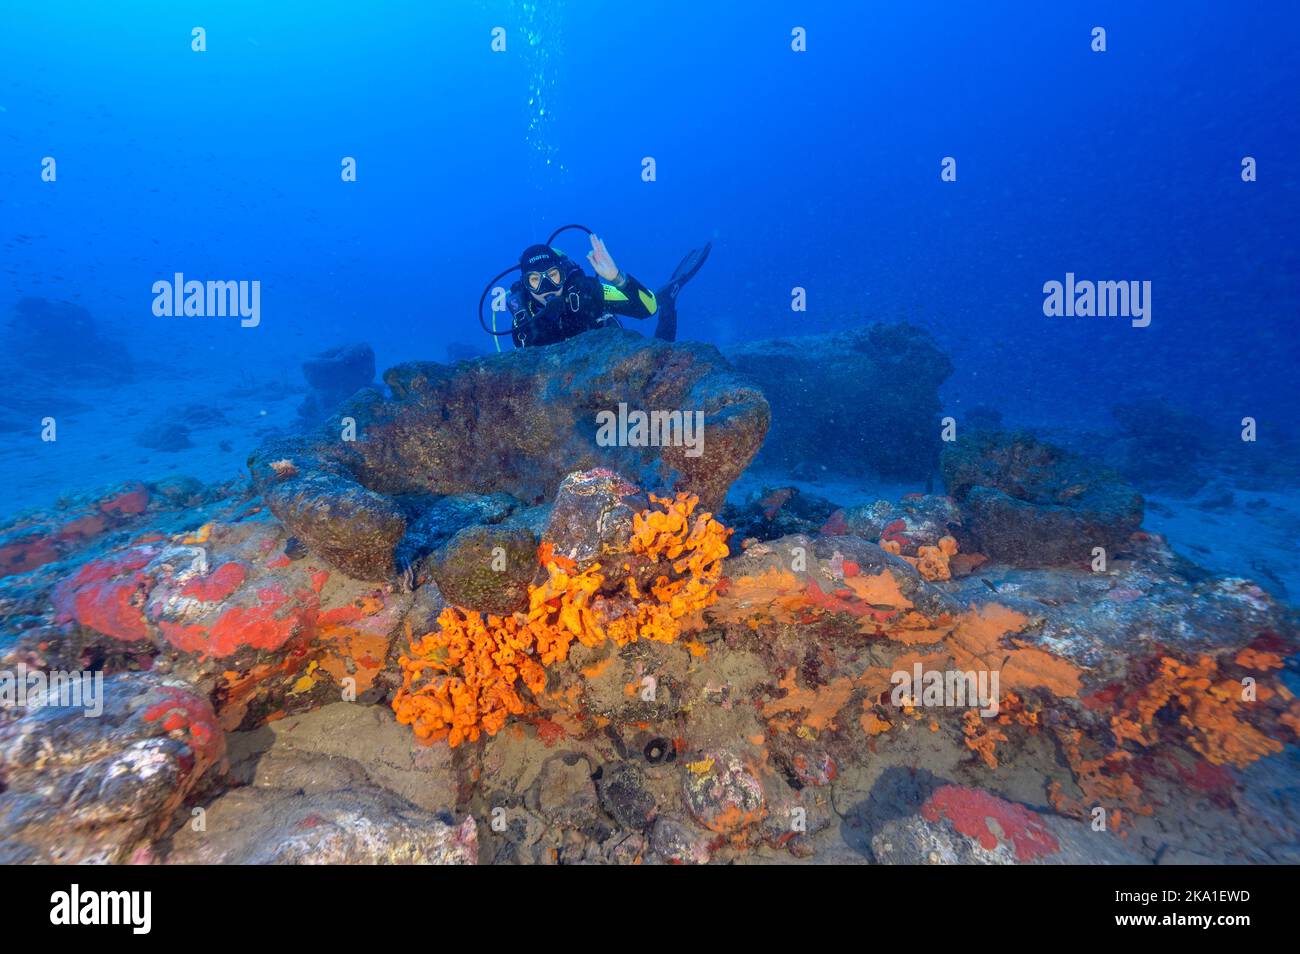 Marine biologists inspecting giant sponges of 40-50 years old in Gokova Bay Marine Protected Area Turkey Stock Photo